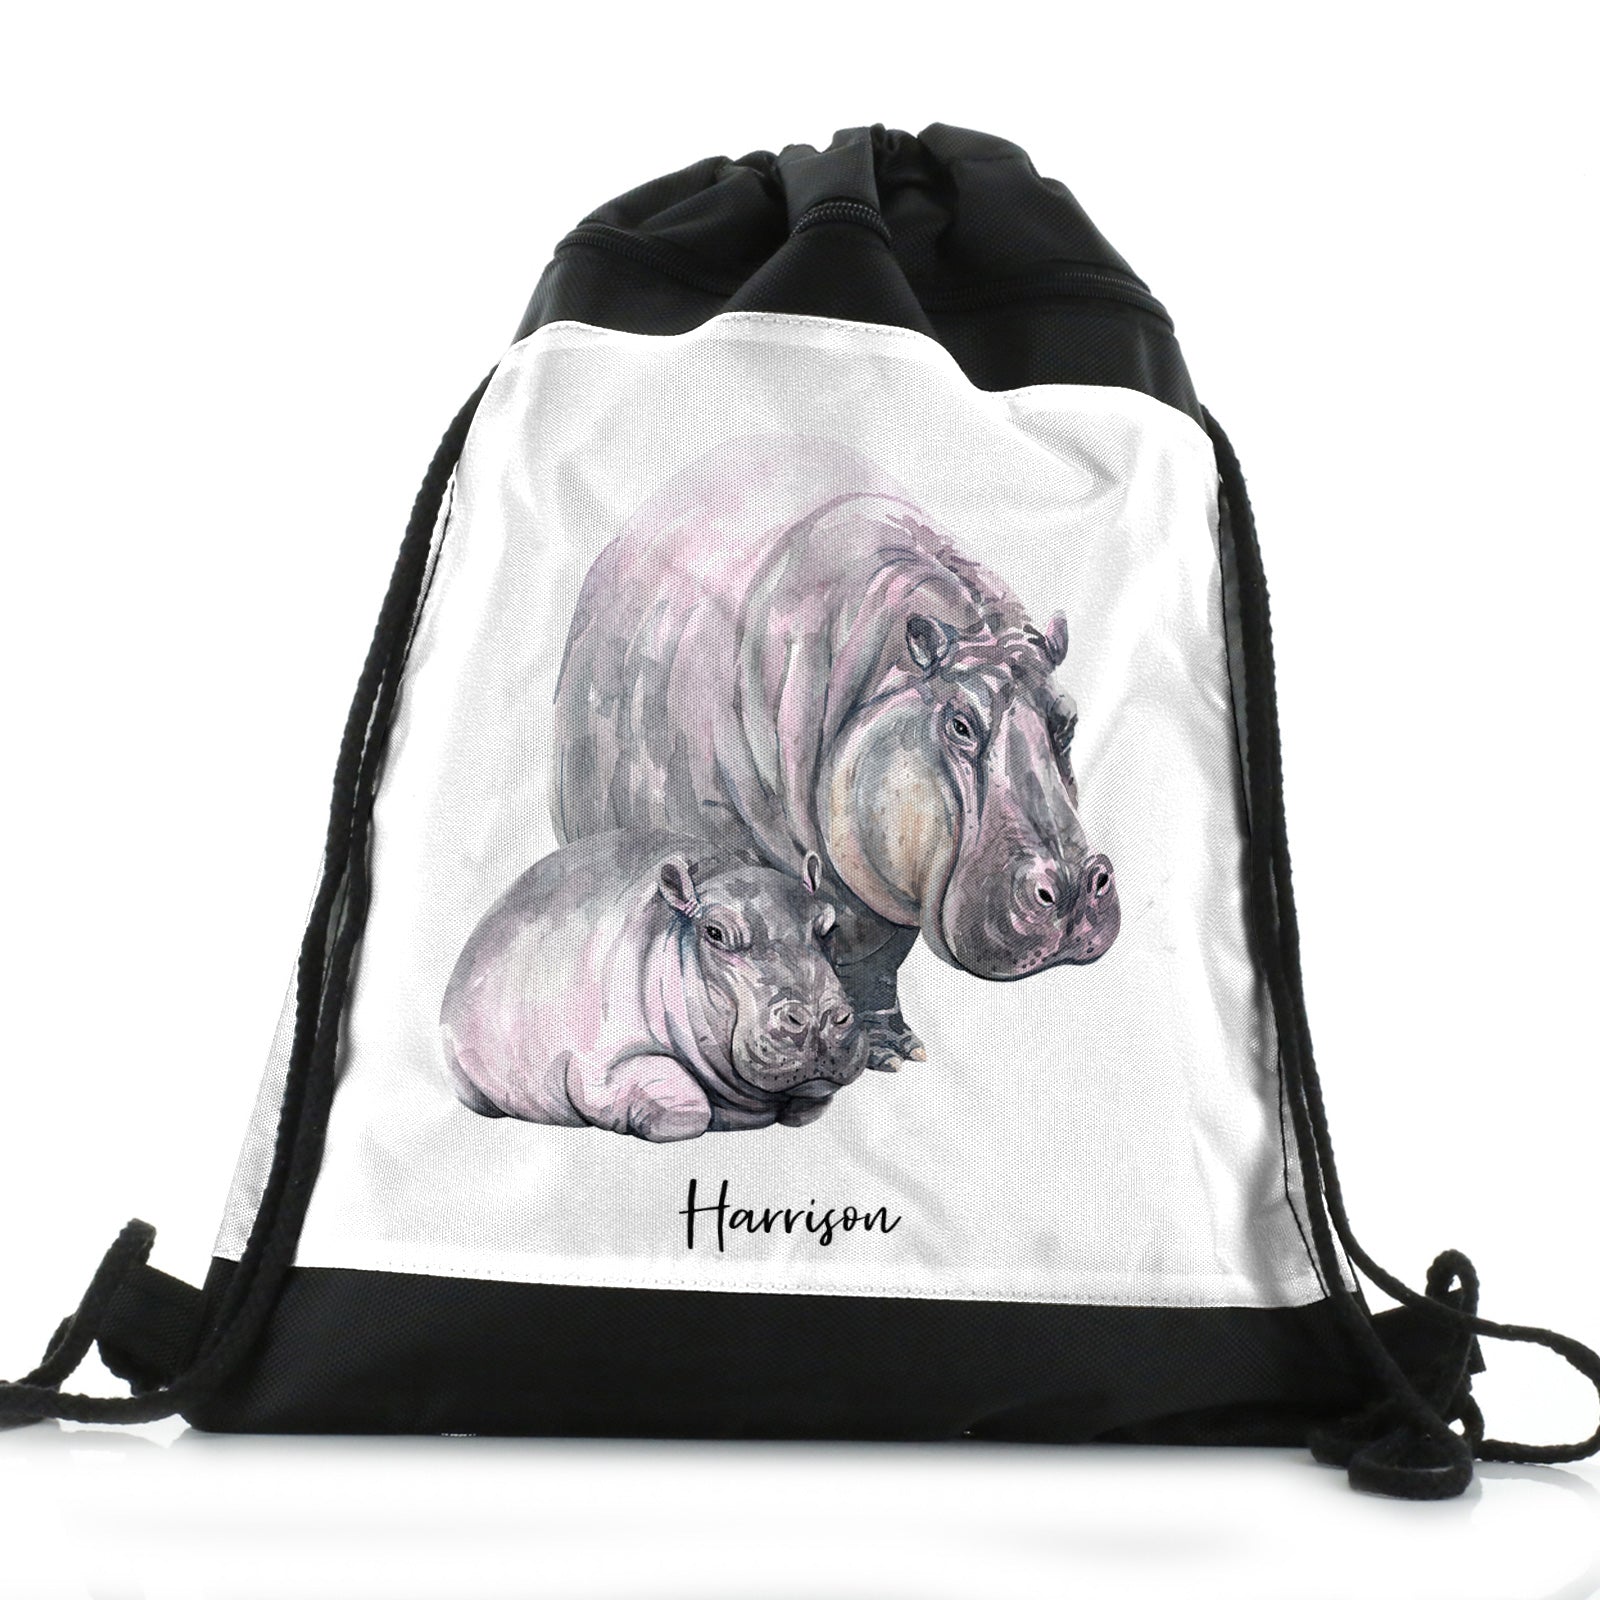 Personalised Drawstring Backpack with Welcoming Text and Relaxing Mum and Baby Hippos